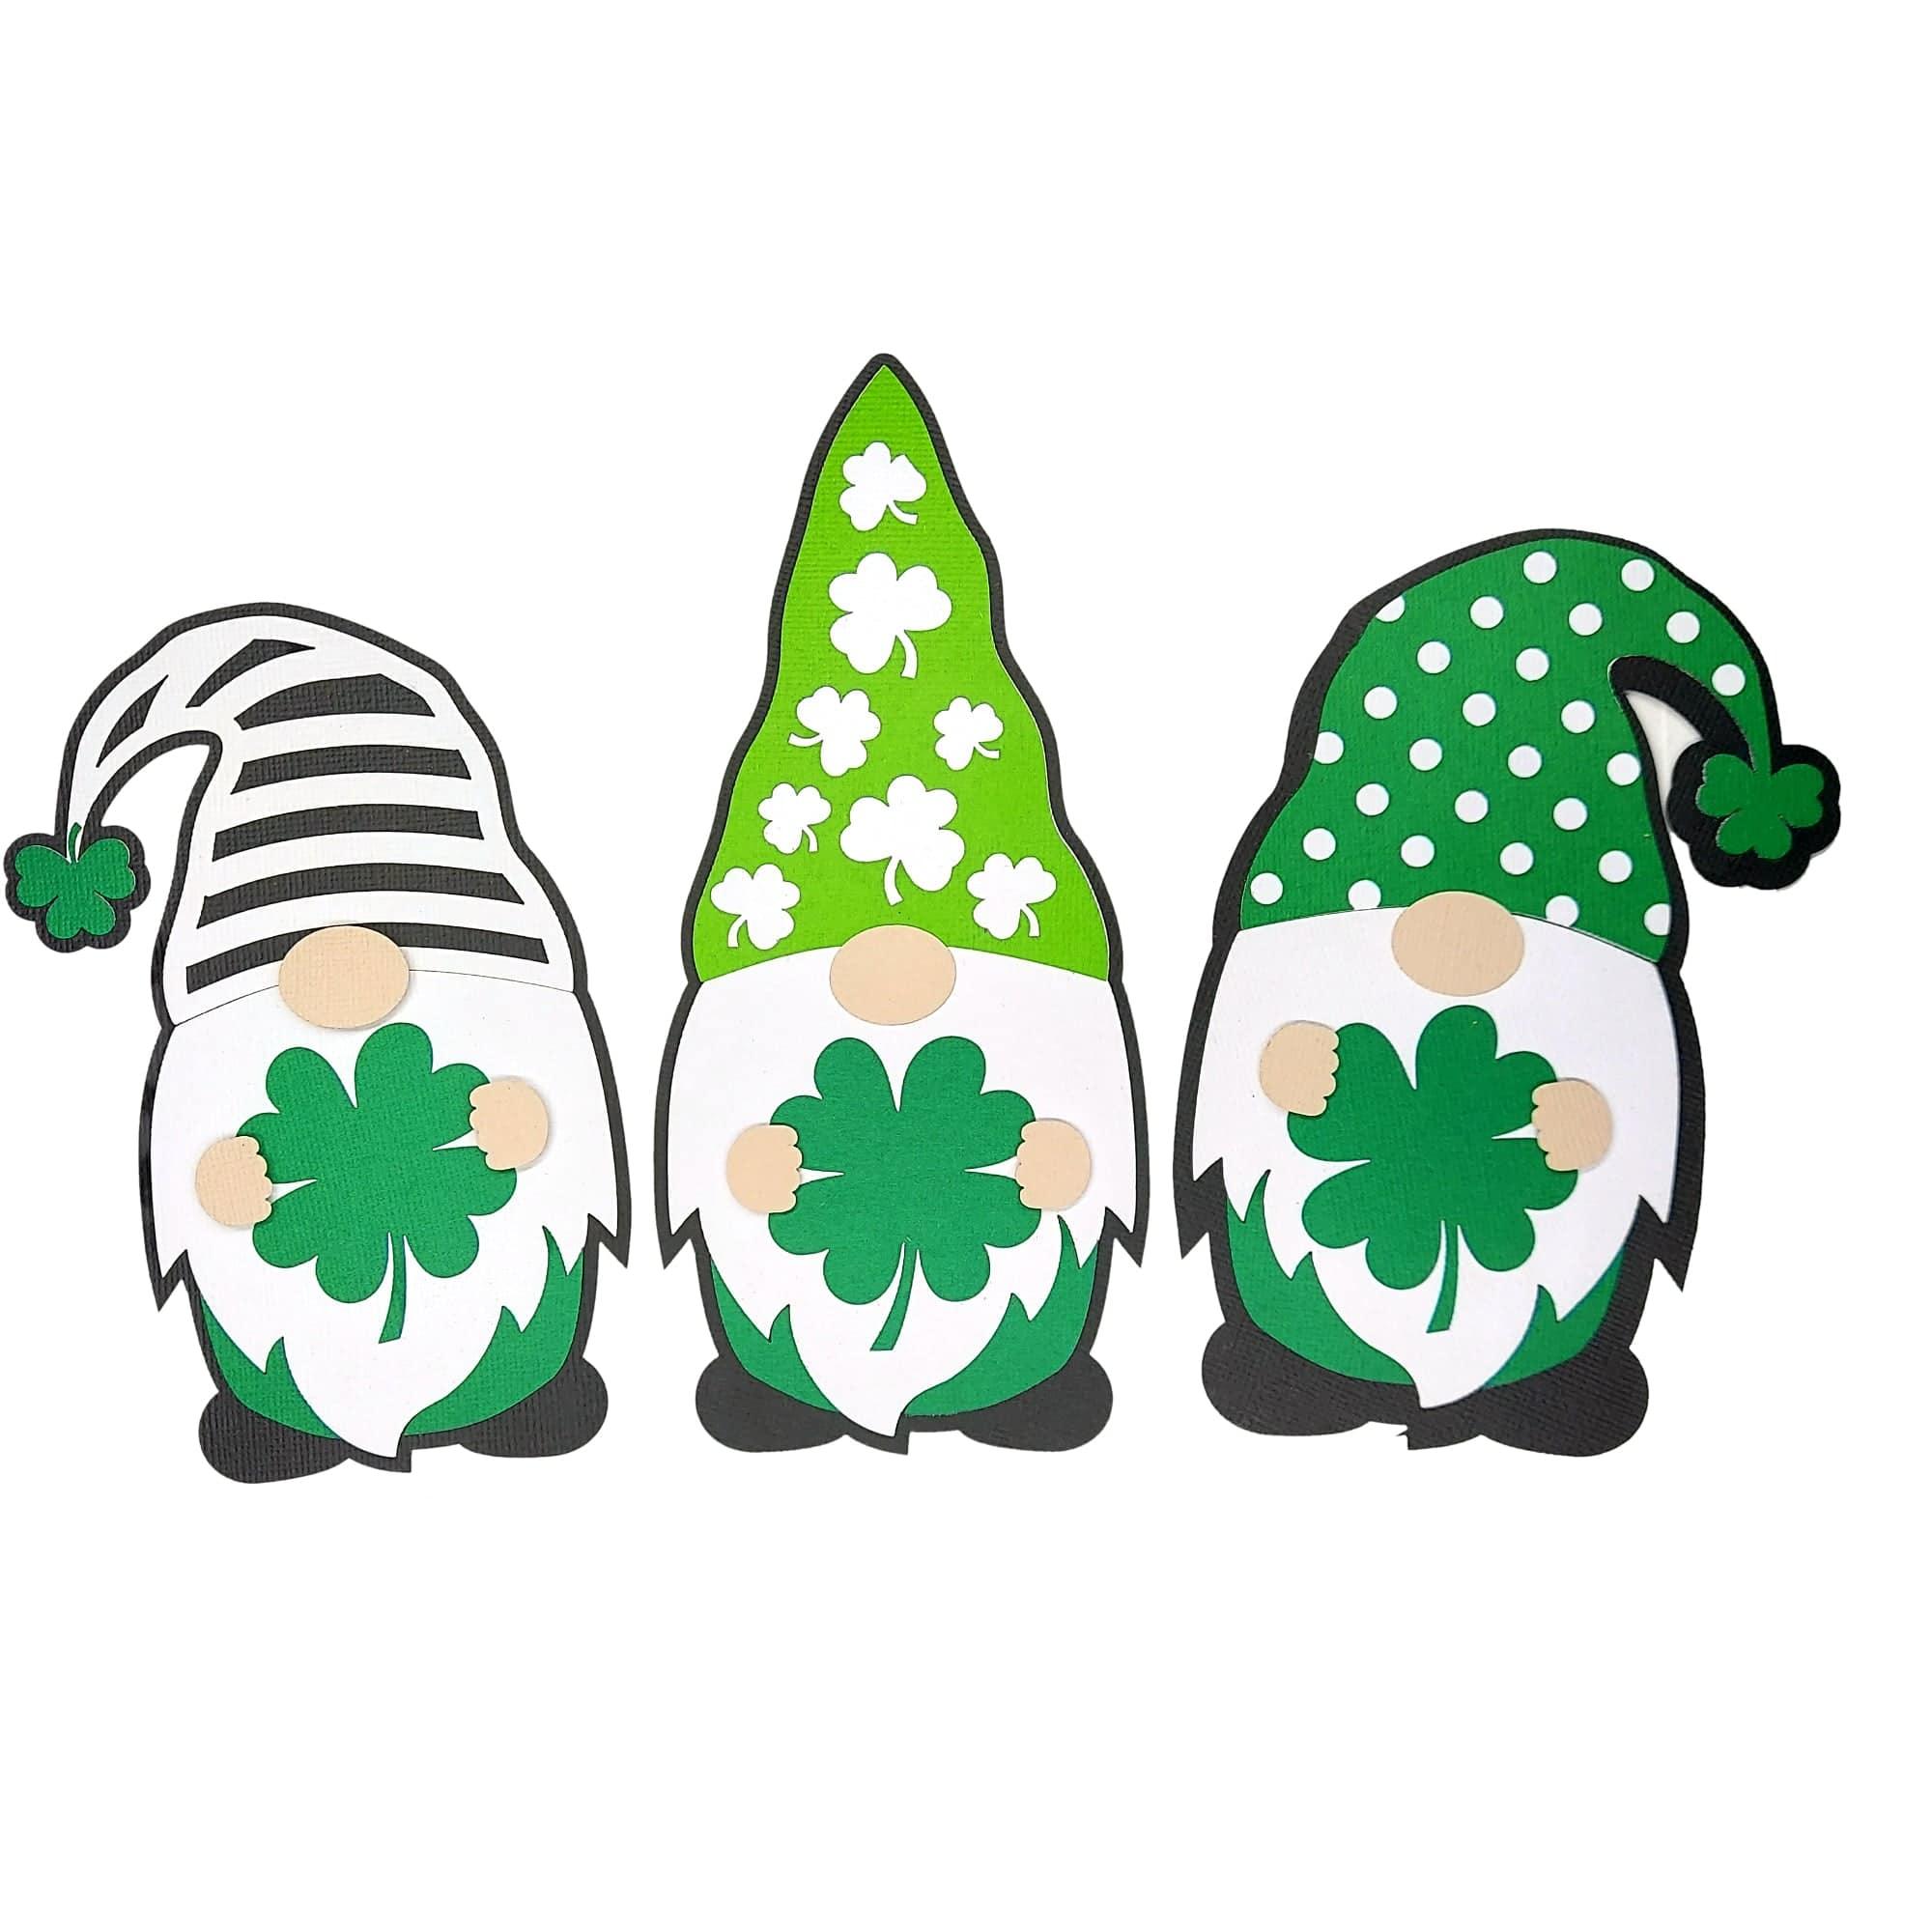 St. Patrick's Day - Set of 3 Gnomes 4.5 X 7.5 Scrapbook Laser Embellishments by SSC Laser Designs